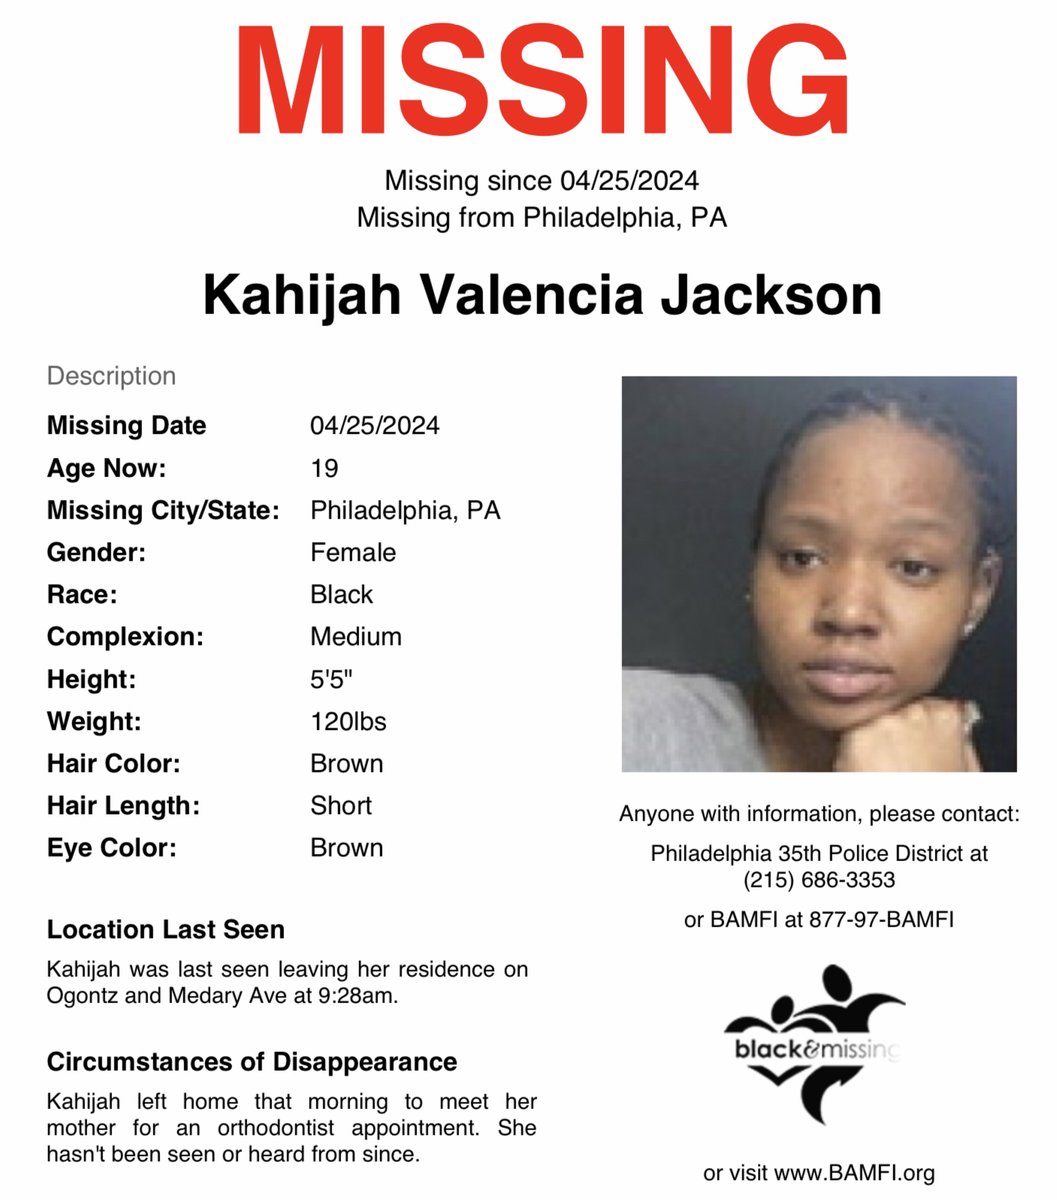 #Philadelphia, #PA: 19y/o Kahijah Jackson was last seen leaving her home on Ogontz & Medary Ave on April 25 at 9:28am. She left home that morning to meet her mother for an orthodontist appointment. She hasn't been seen or heard from since. Have you seen Kahijah? #KahijahJackson